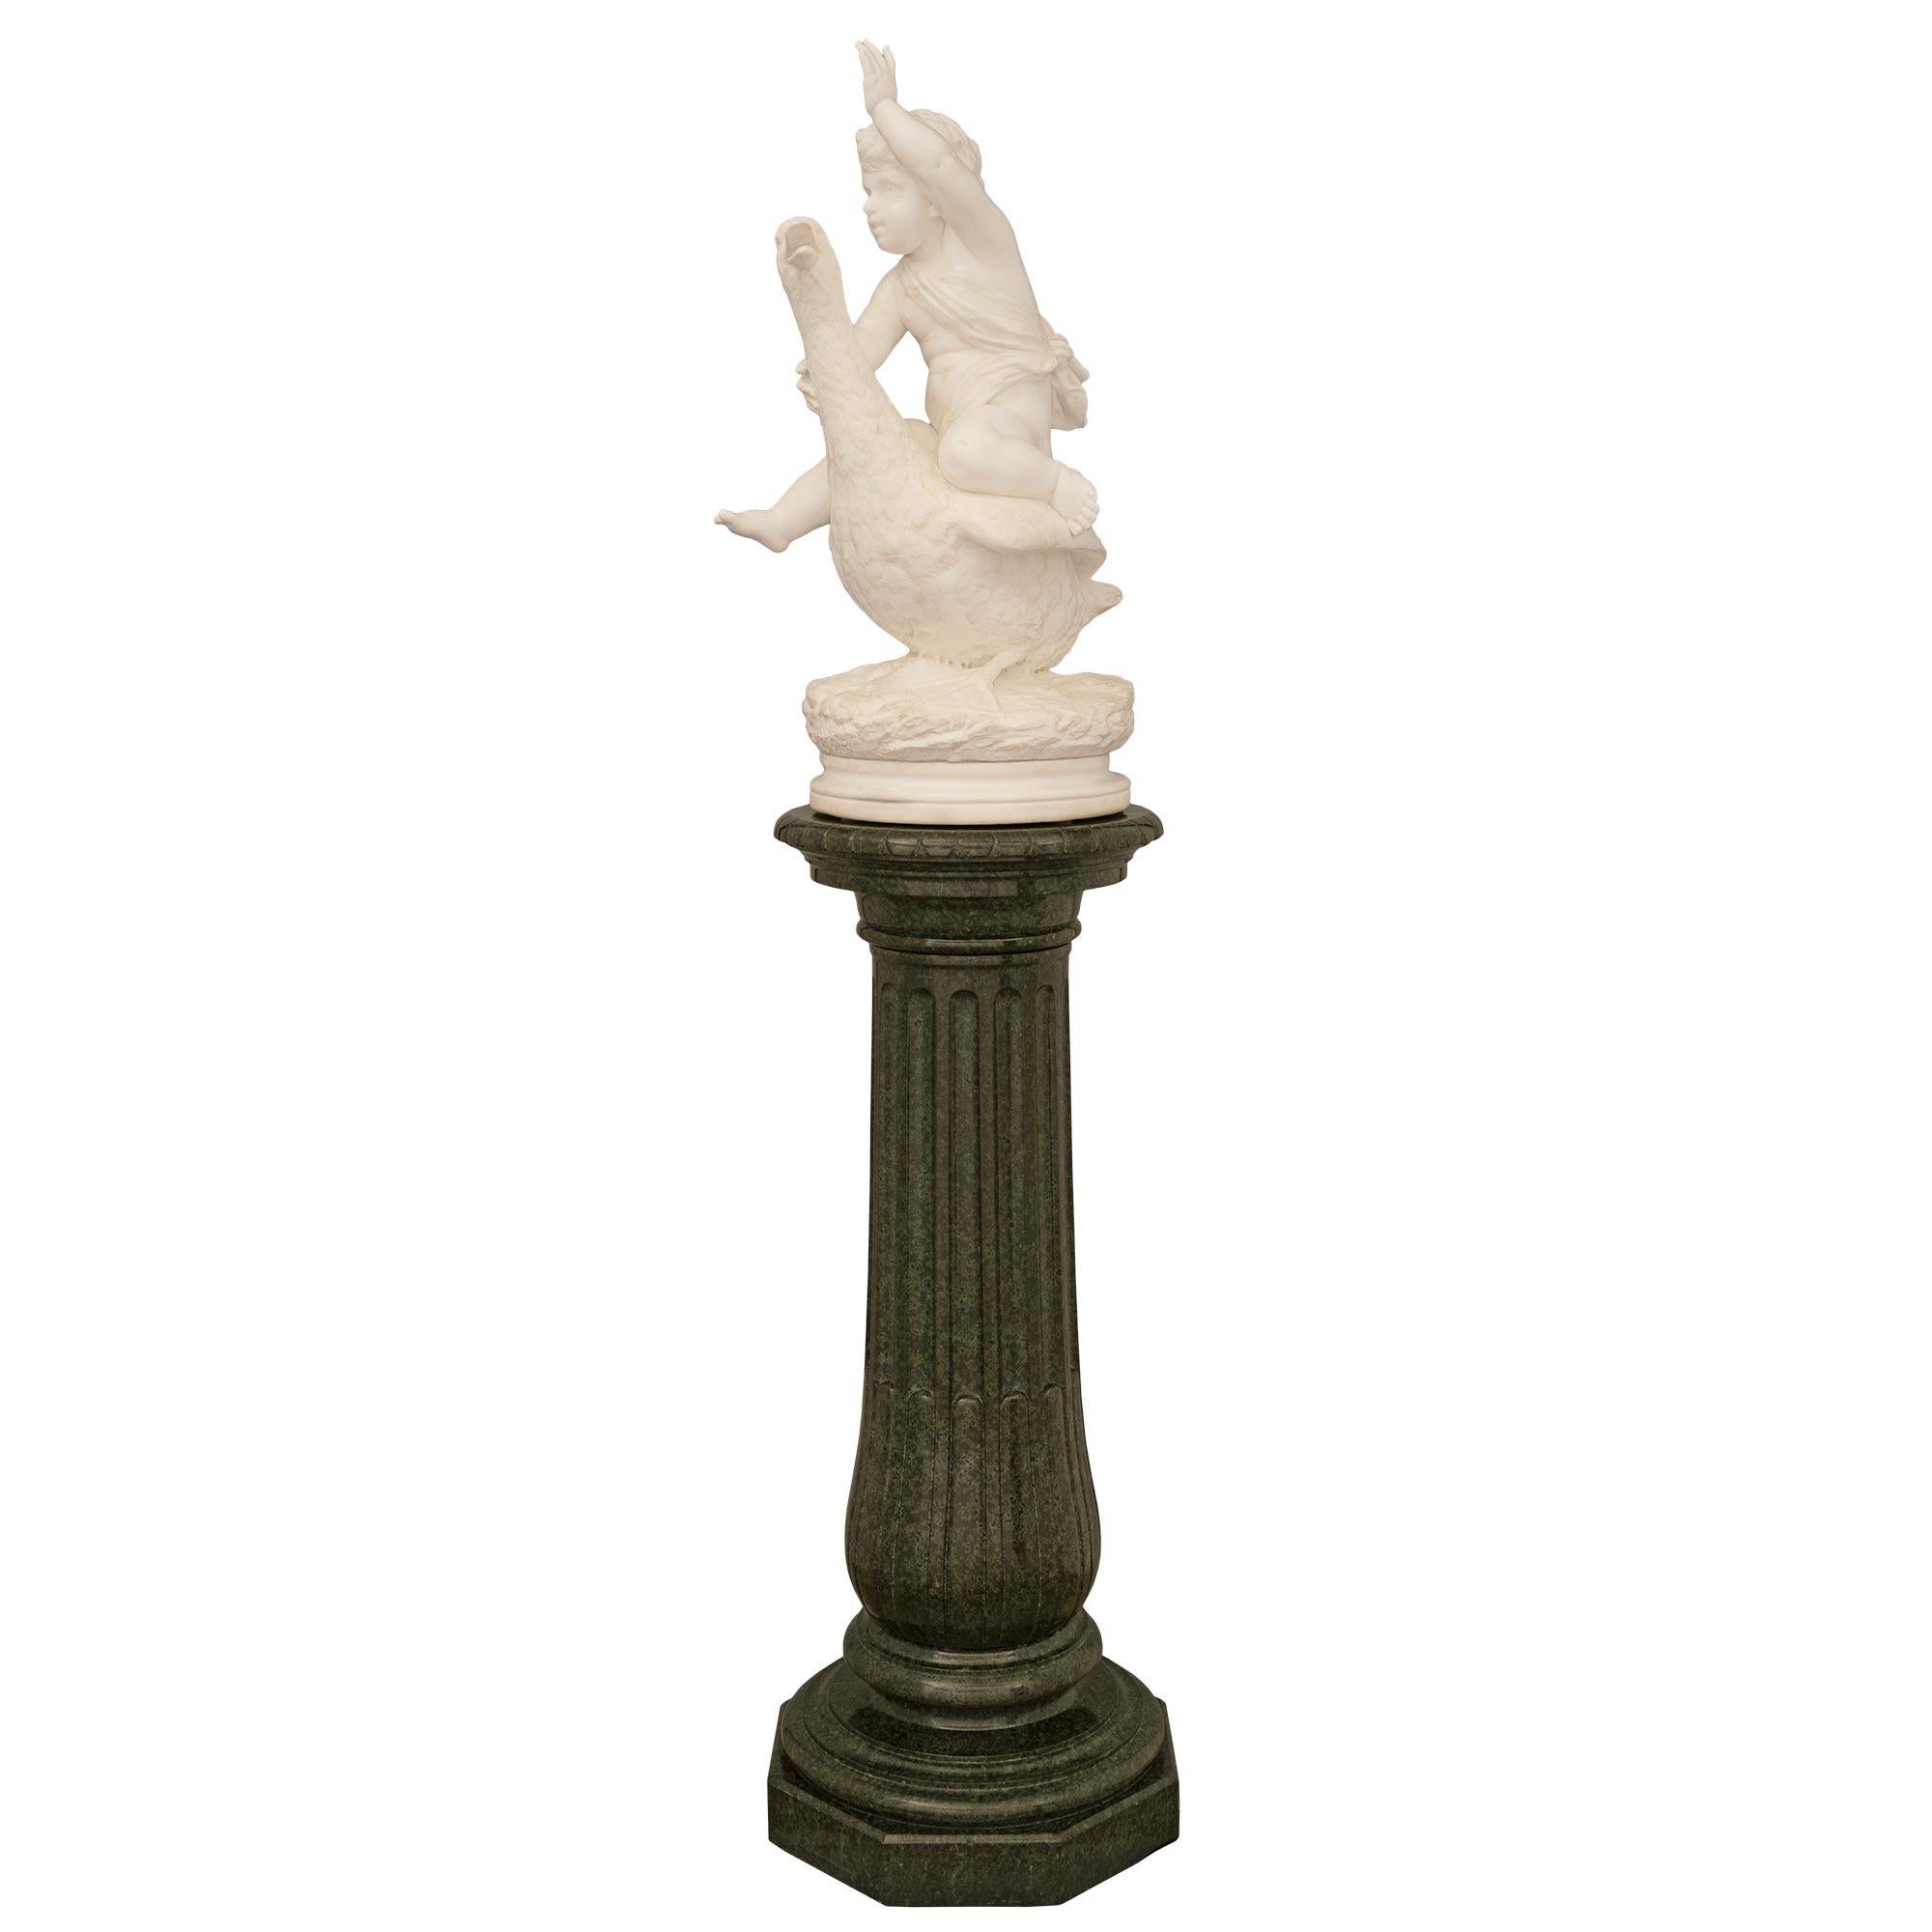 A stunning and very high quality Italian 19th century white Carrara marble statue on its original Vert de Patricia marble pedestal signed Barbieri. The statue is raised on its original most elegant Vert de Patricia marble pedestal column with a fine